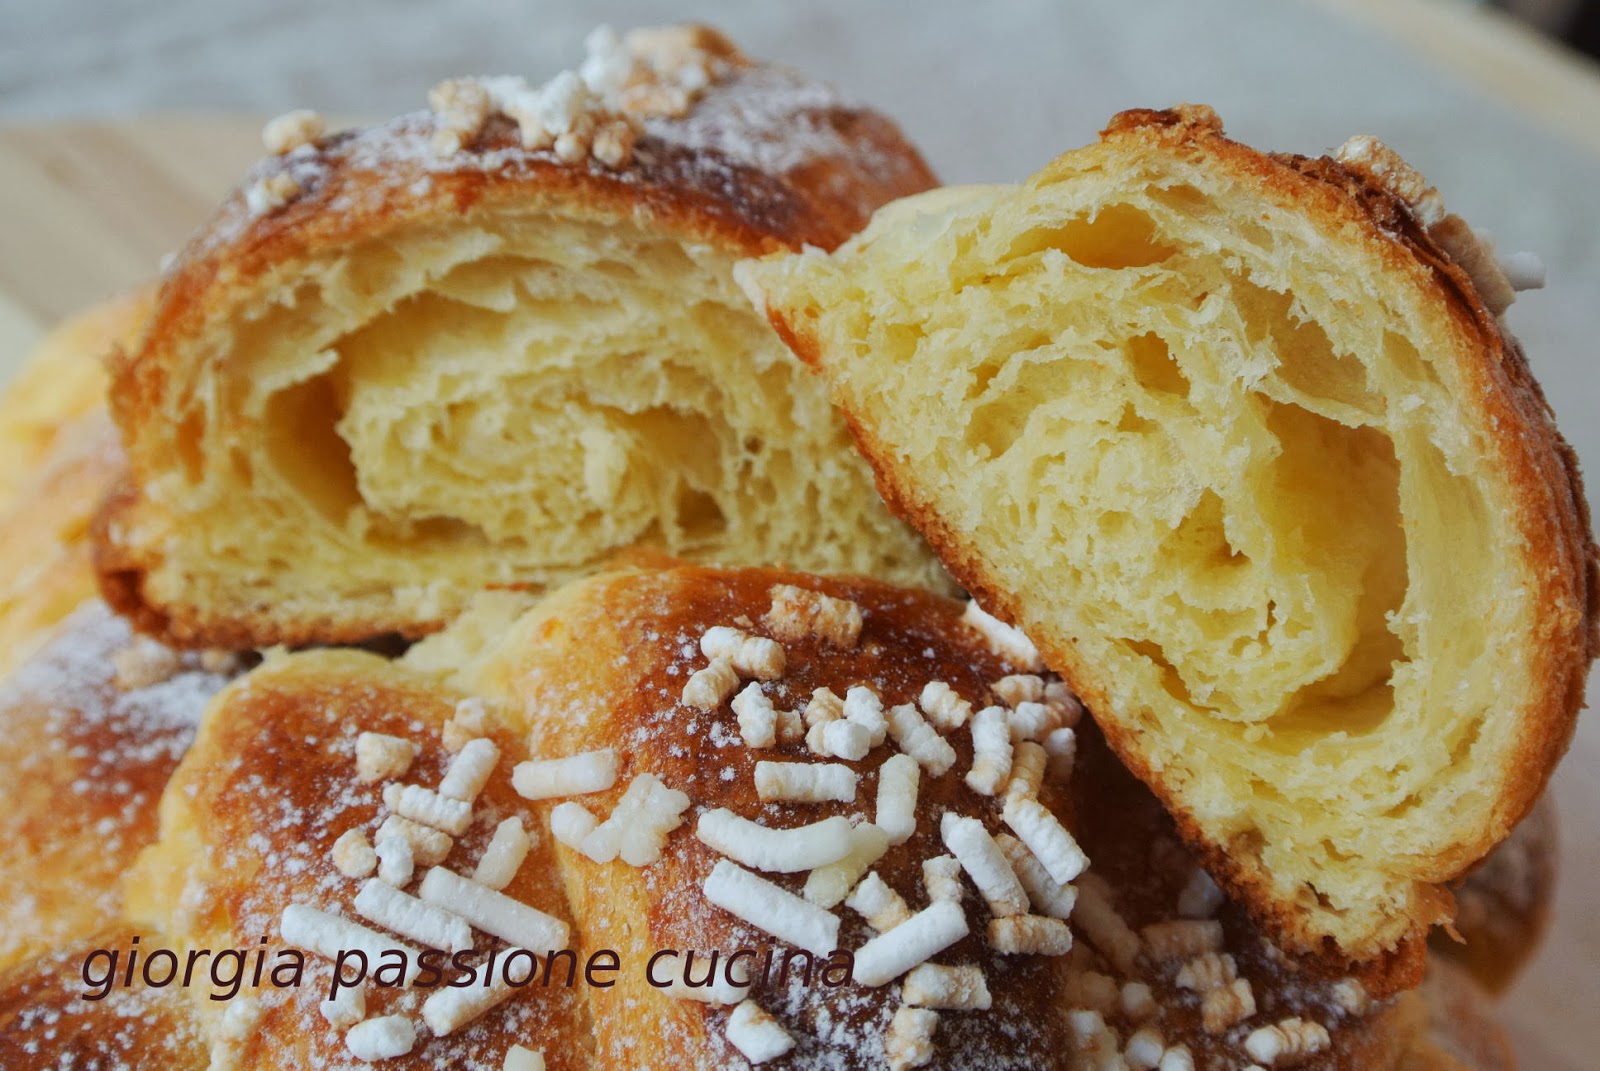 Croissant Chi Si Unisce? – About Our Bakery